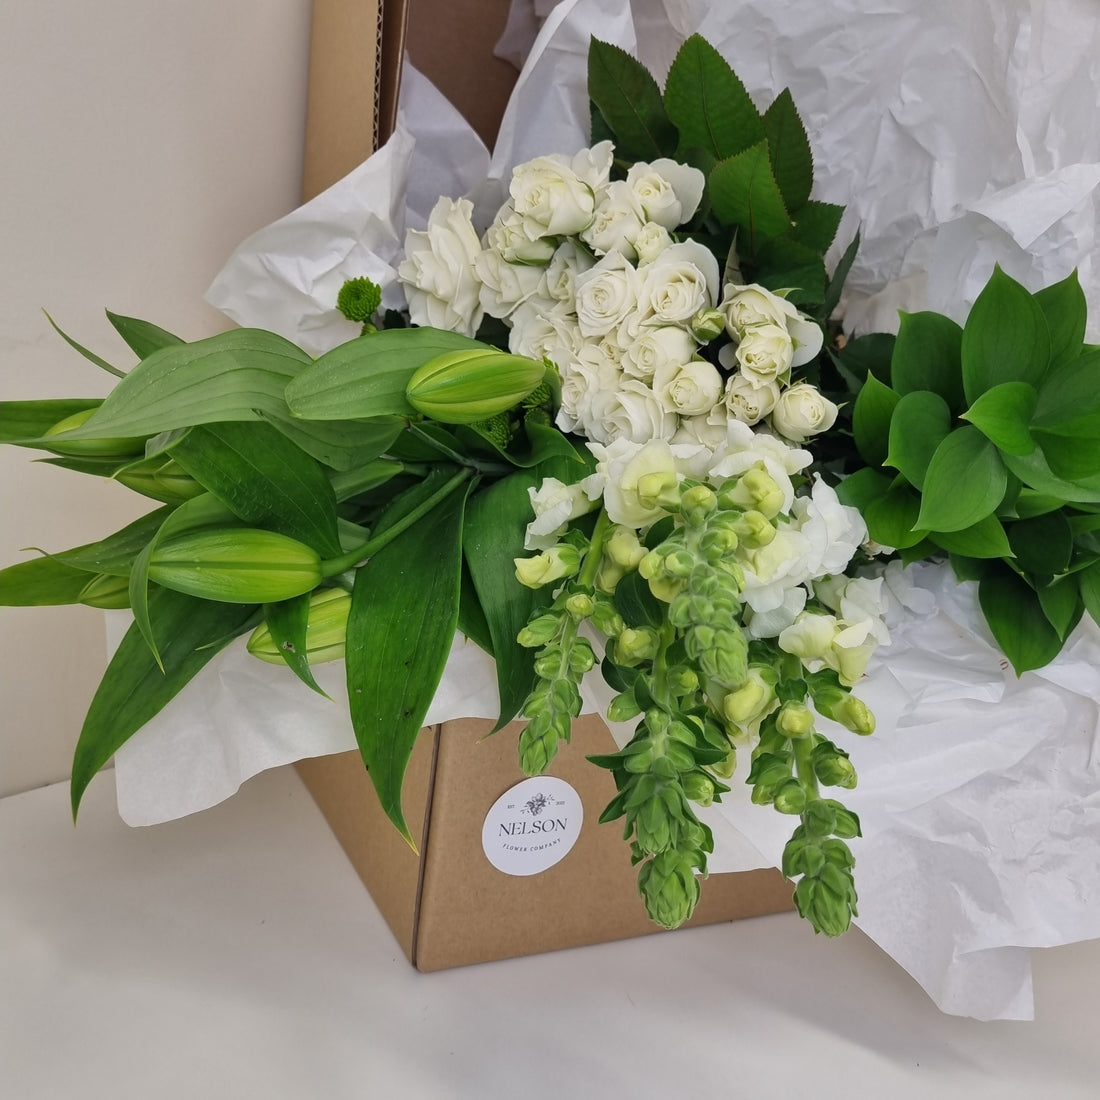 Elegant &amp; Understated Fresh Flower Box, with greenery in a cardboard box with white tissue paper.